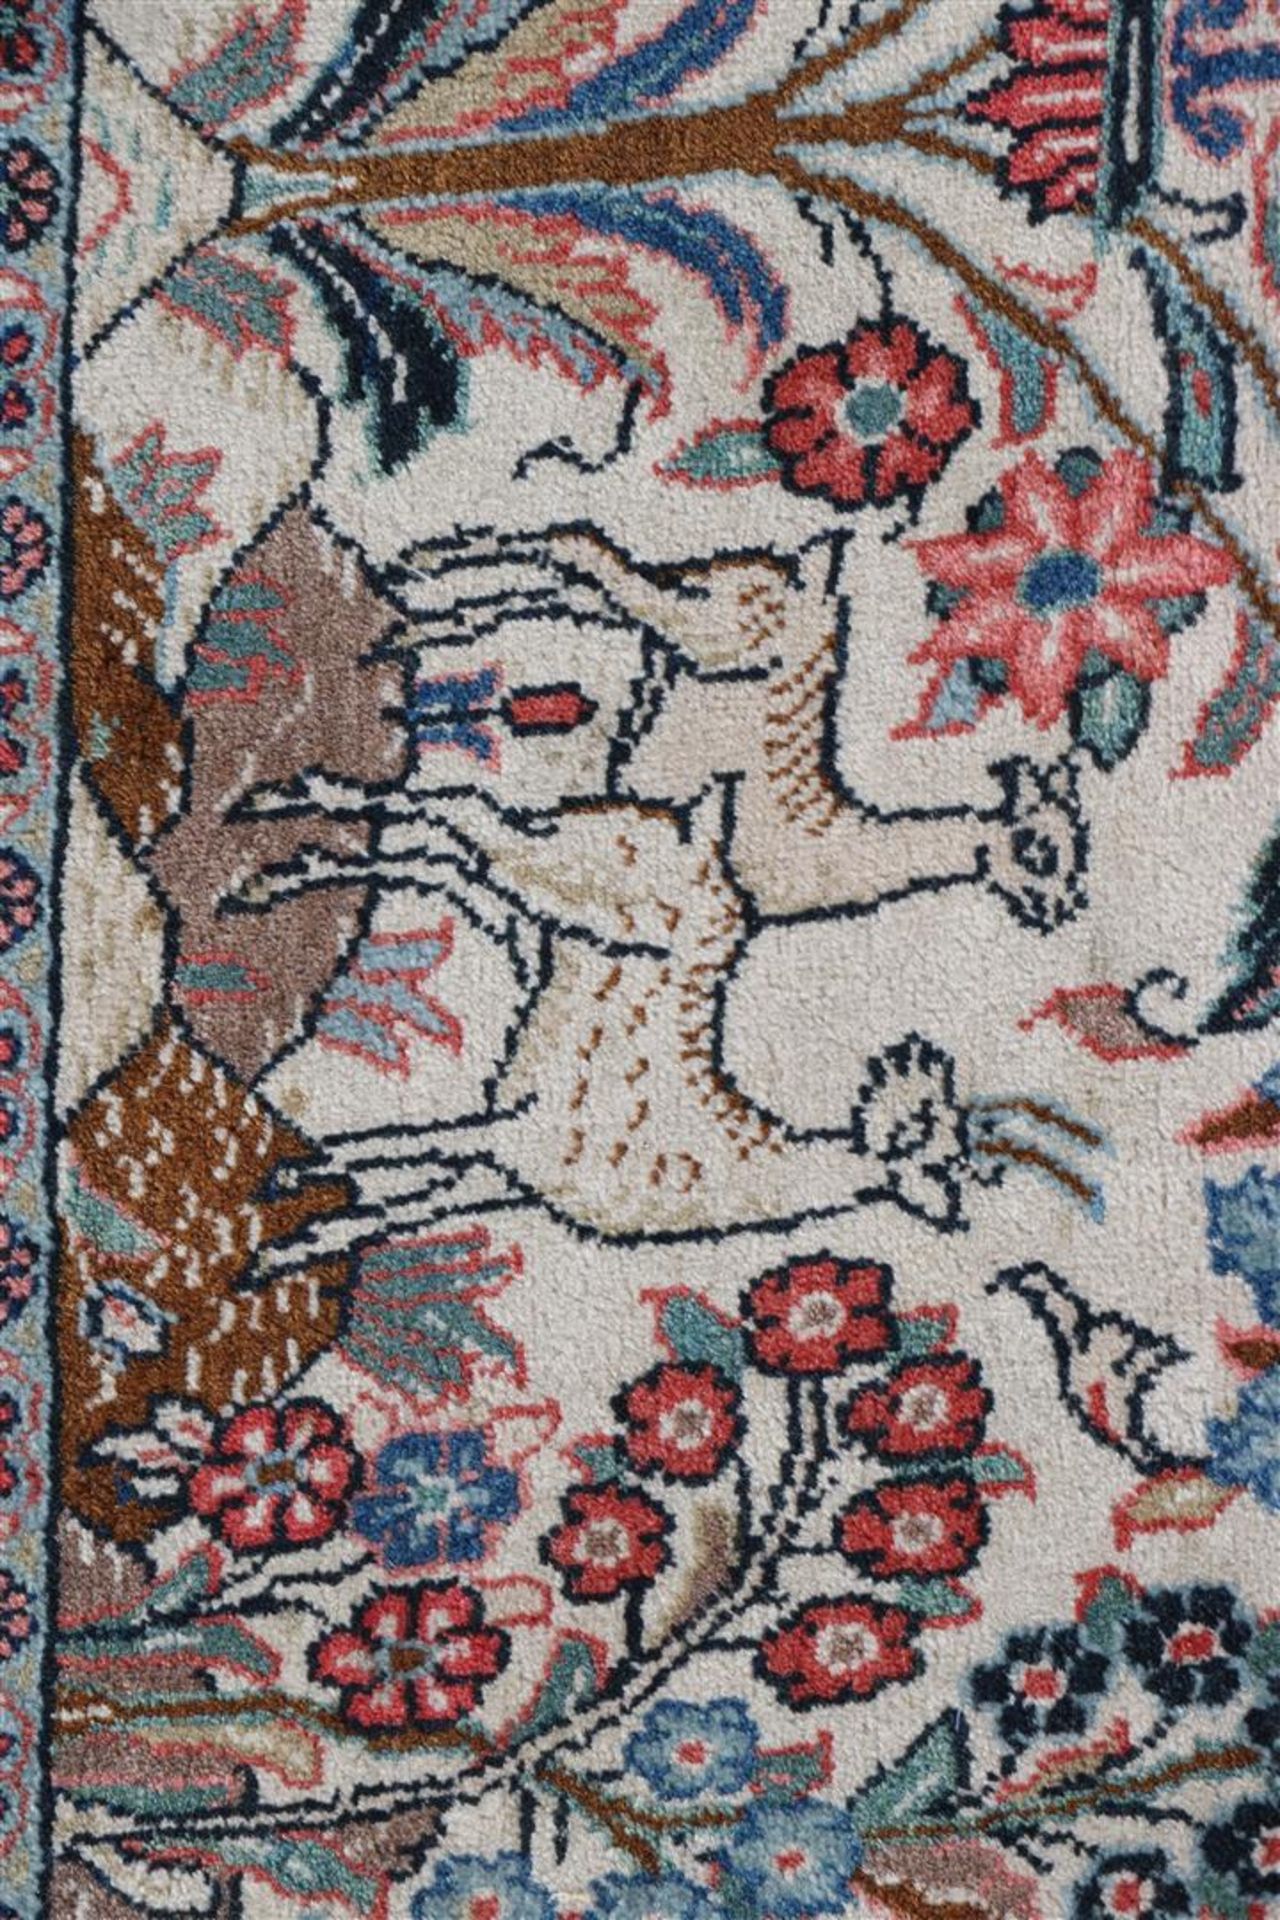 Hand-knotted Ispahan carpet - Image 2 of 5